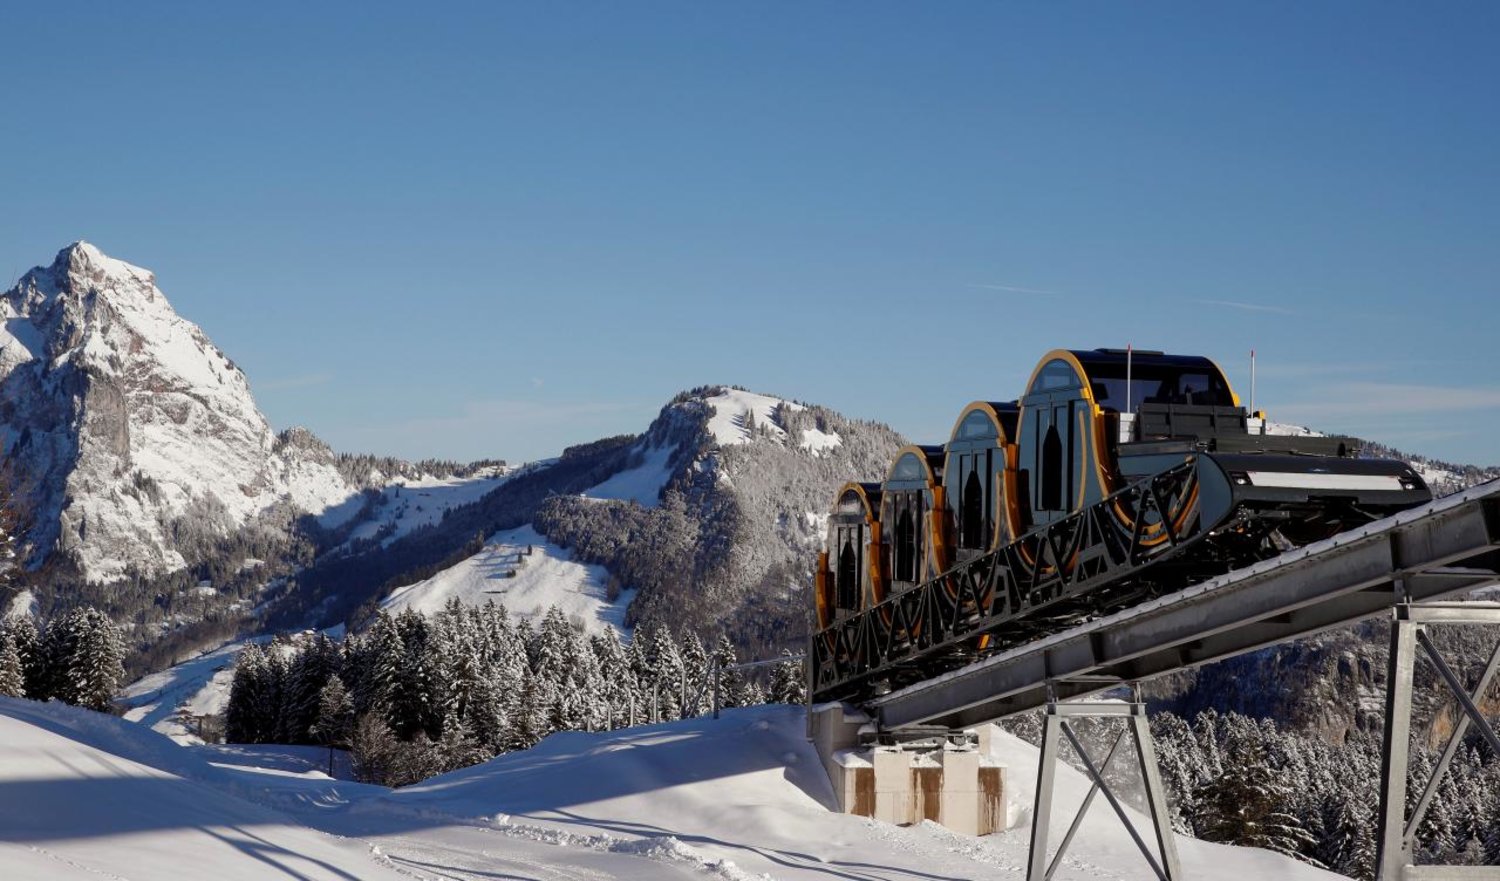 The barrel-shaped carriages of a new funicular line are seen front of mount Grosser Mythen (1,898 m/6,227 ft above sea level) during sunny winter weather in the Alpine resort of Stoos, Switzerland December 13, 2017. Picture taken on December 13, 2017. REUTERS/Arnd Wiegmann